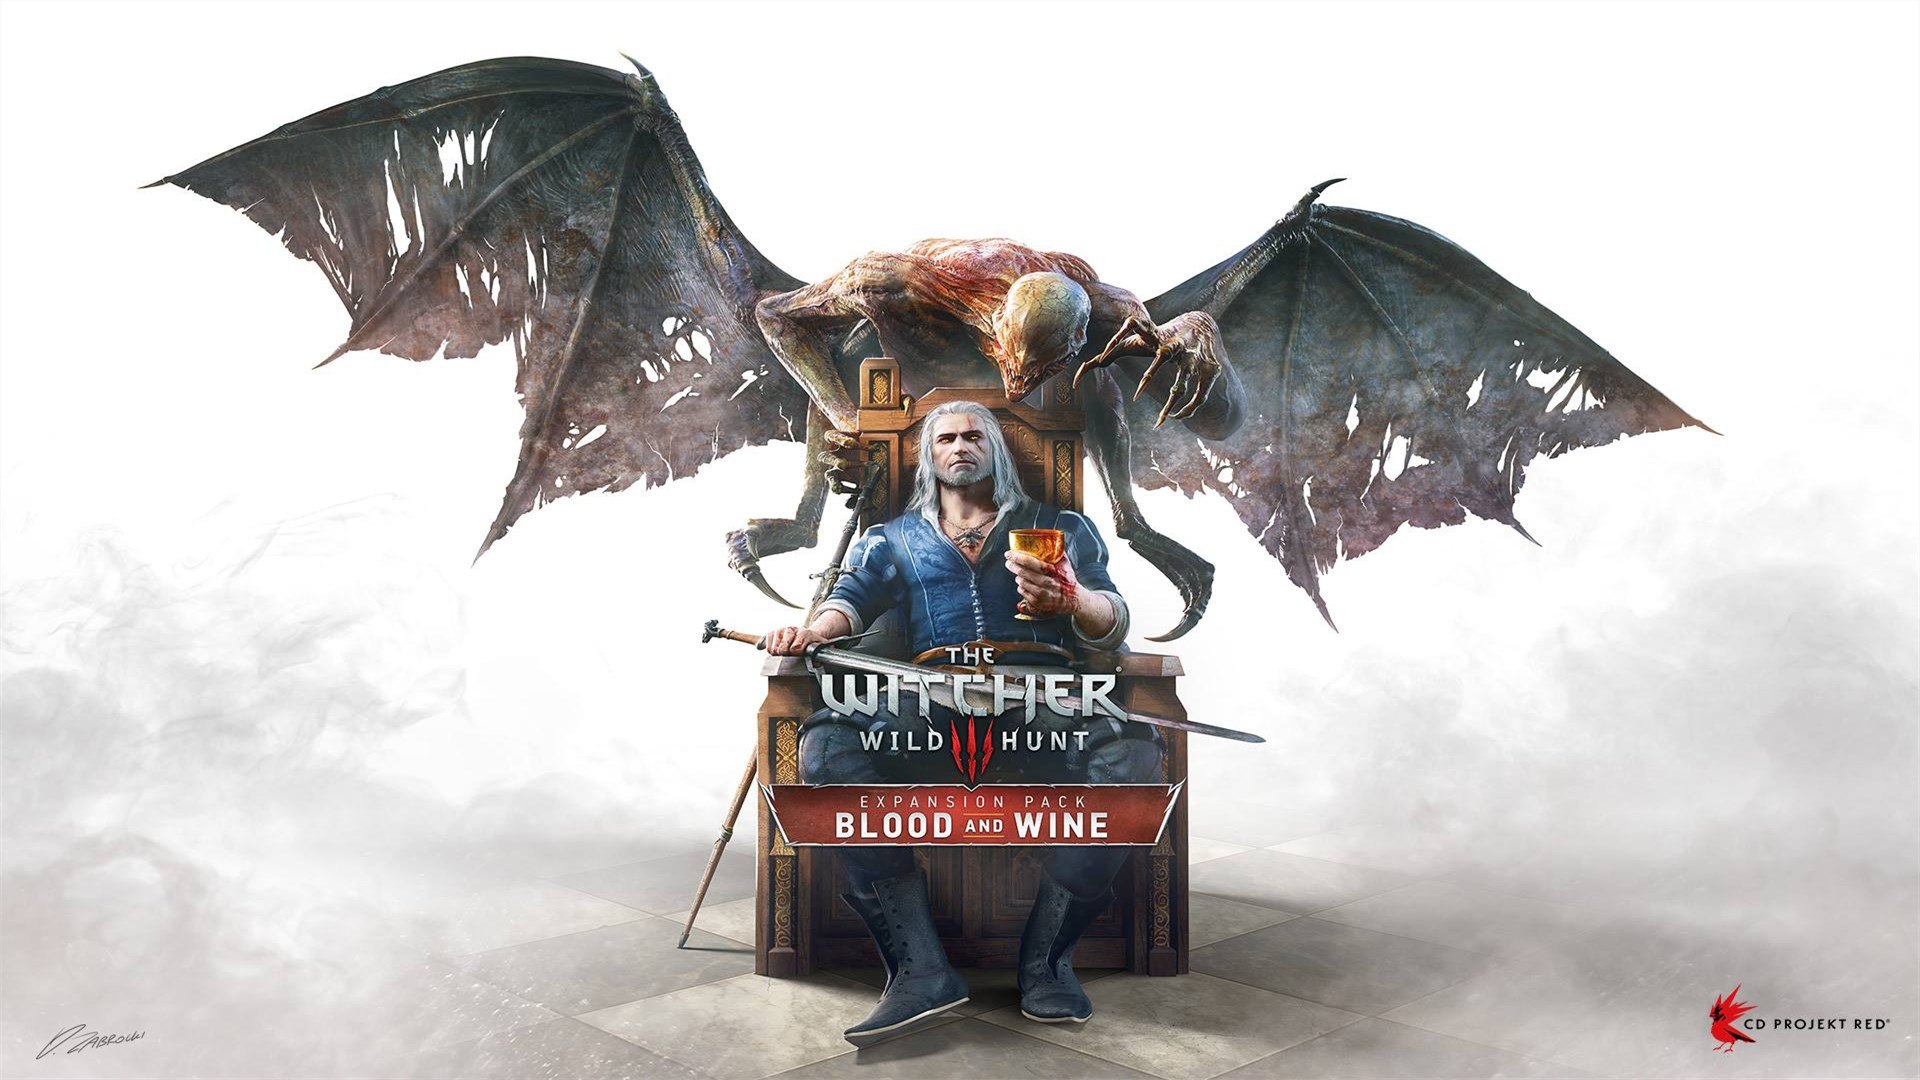 The Witcher 3 - Blood and Wine (10-17) L'homme de Cintra - Vidéo Dailymotion